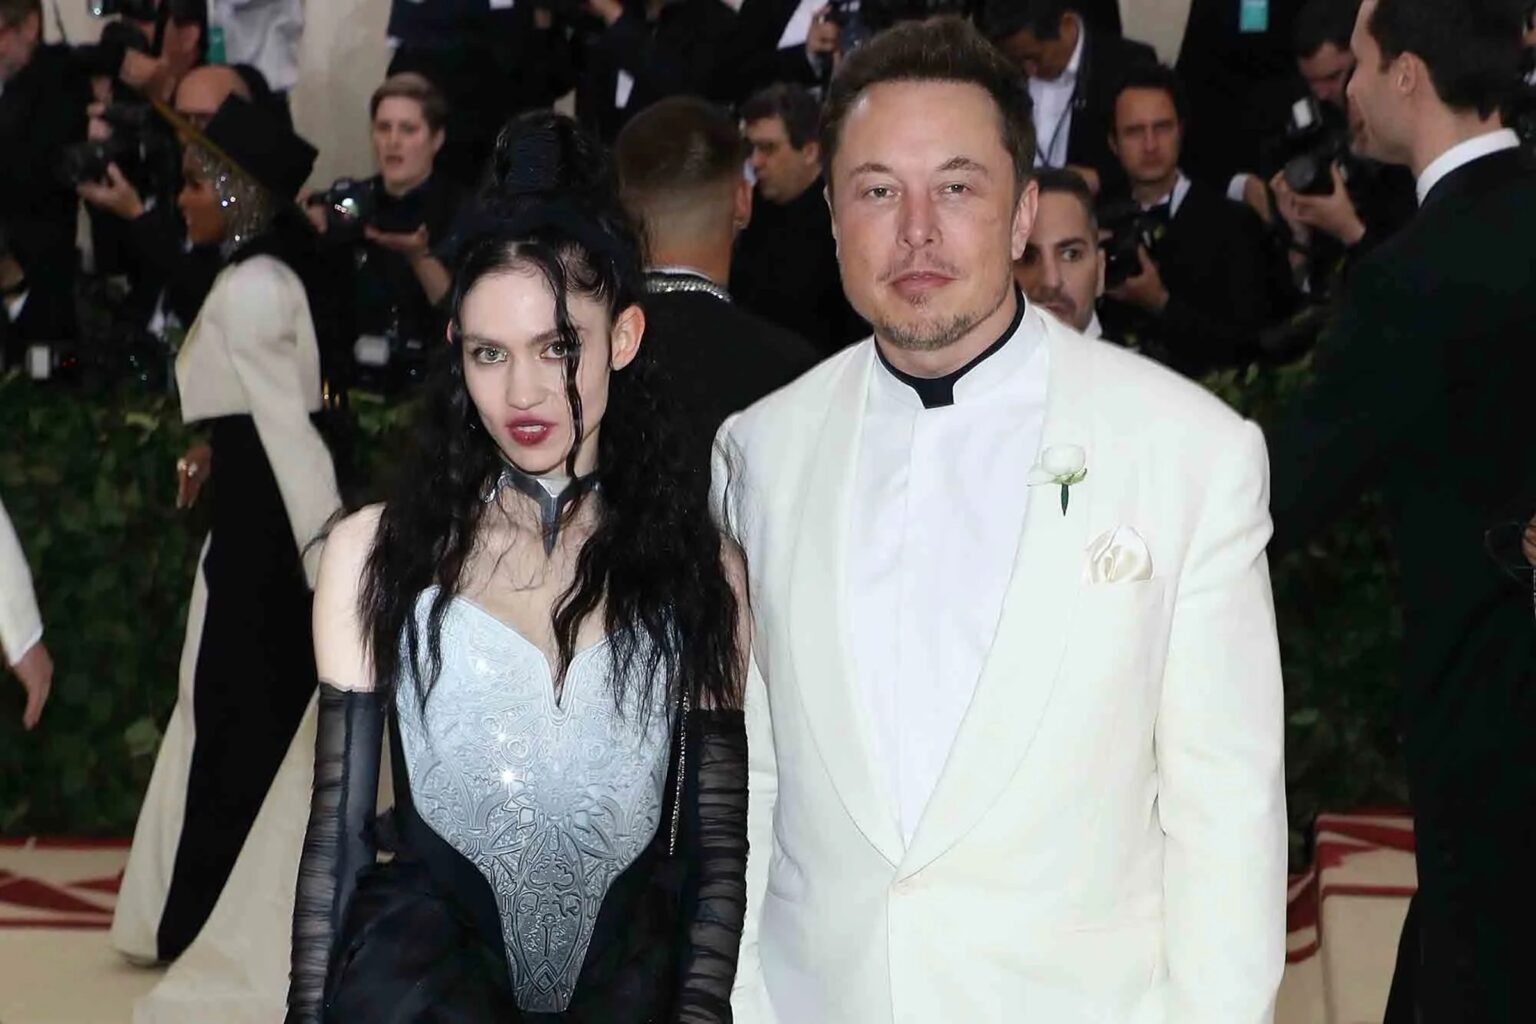 Magnate Elon Musk and musician Grimes have finally called it quits. Launch into the story and see why the couple broke up after three years together.